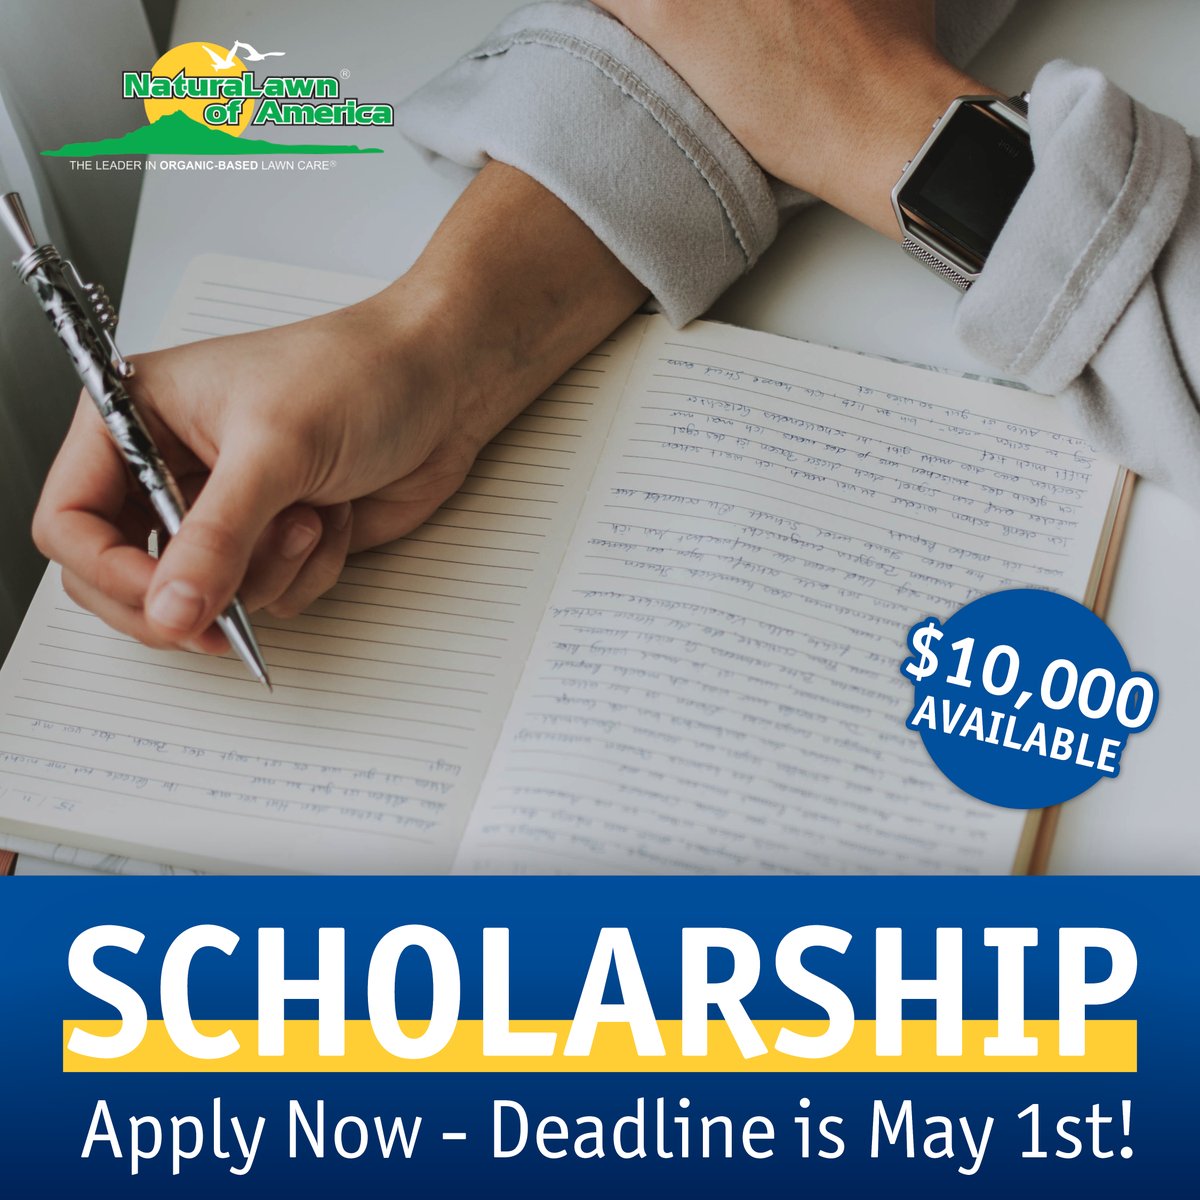 Apply now before May 1st for a chance to receive $5,000 or share this with a High School senior or Undergrad who can benefit from this scholarship opportunity!

Apply here: ow.ly/kliR50RjM5k

#NaturaLawn #NLA #IndustryLeader #TheDanCollinsScholarship #ScholarshipOpportunity